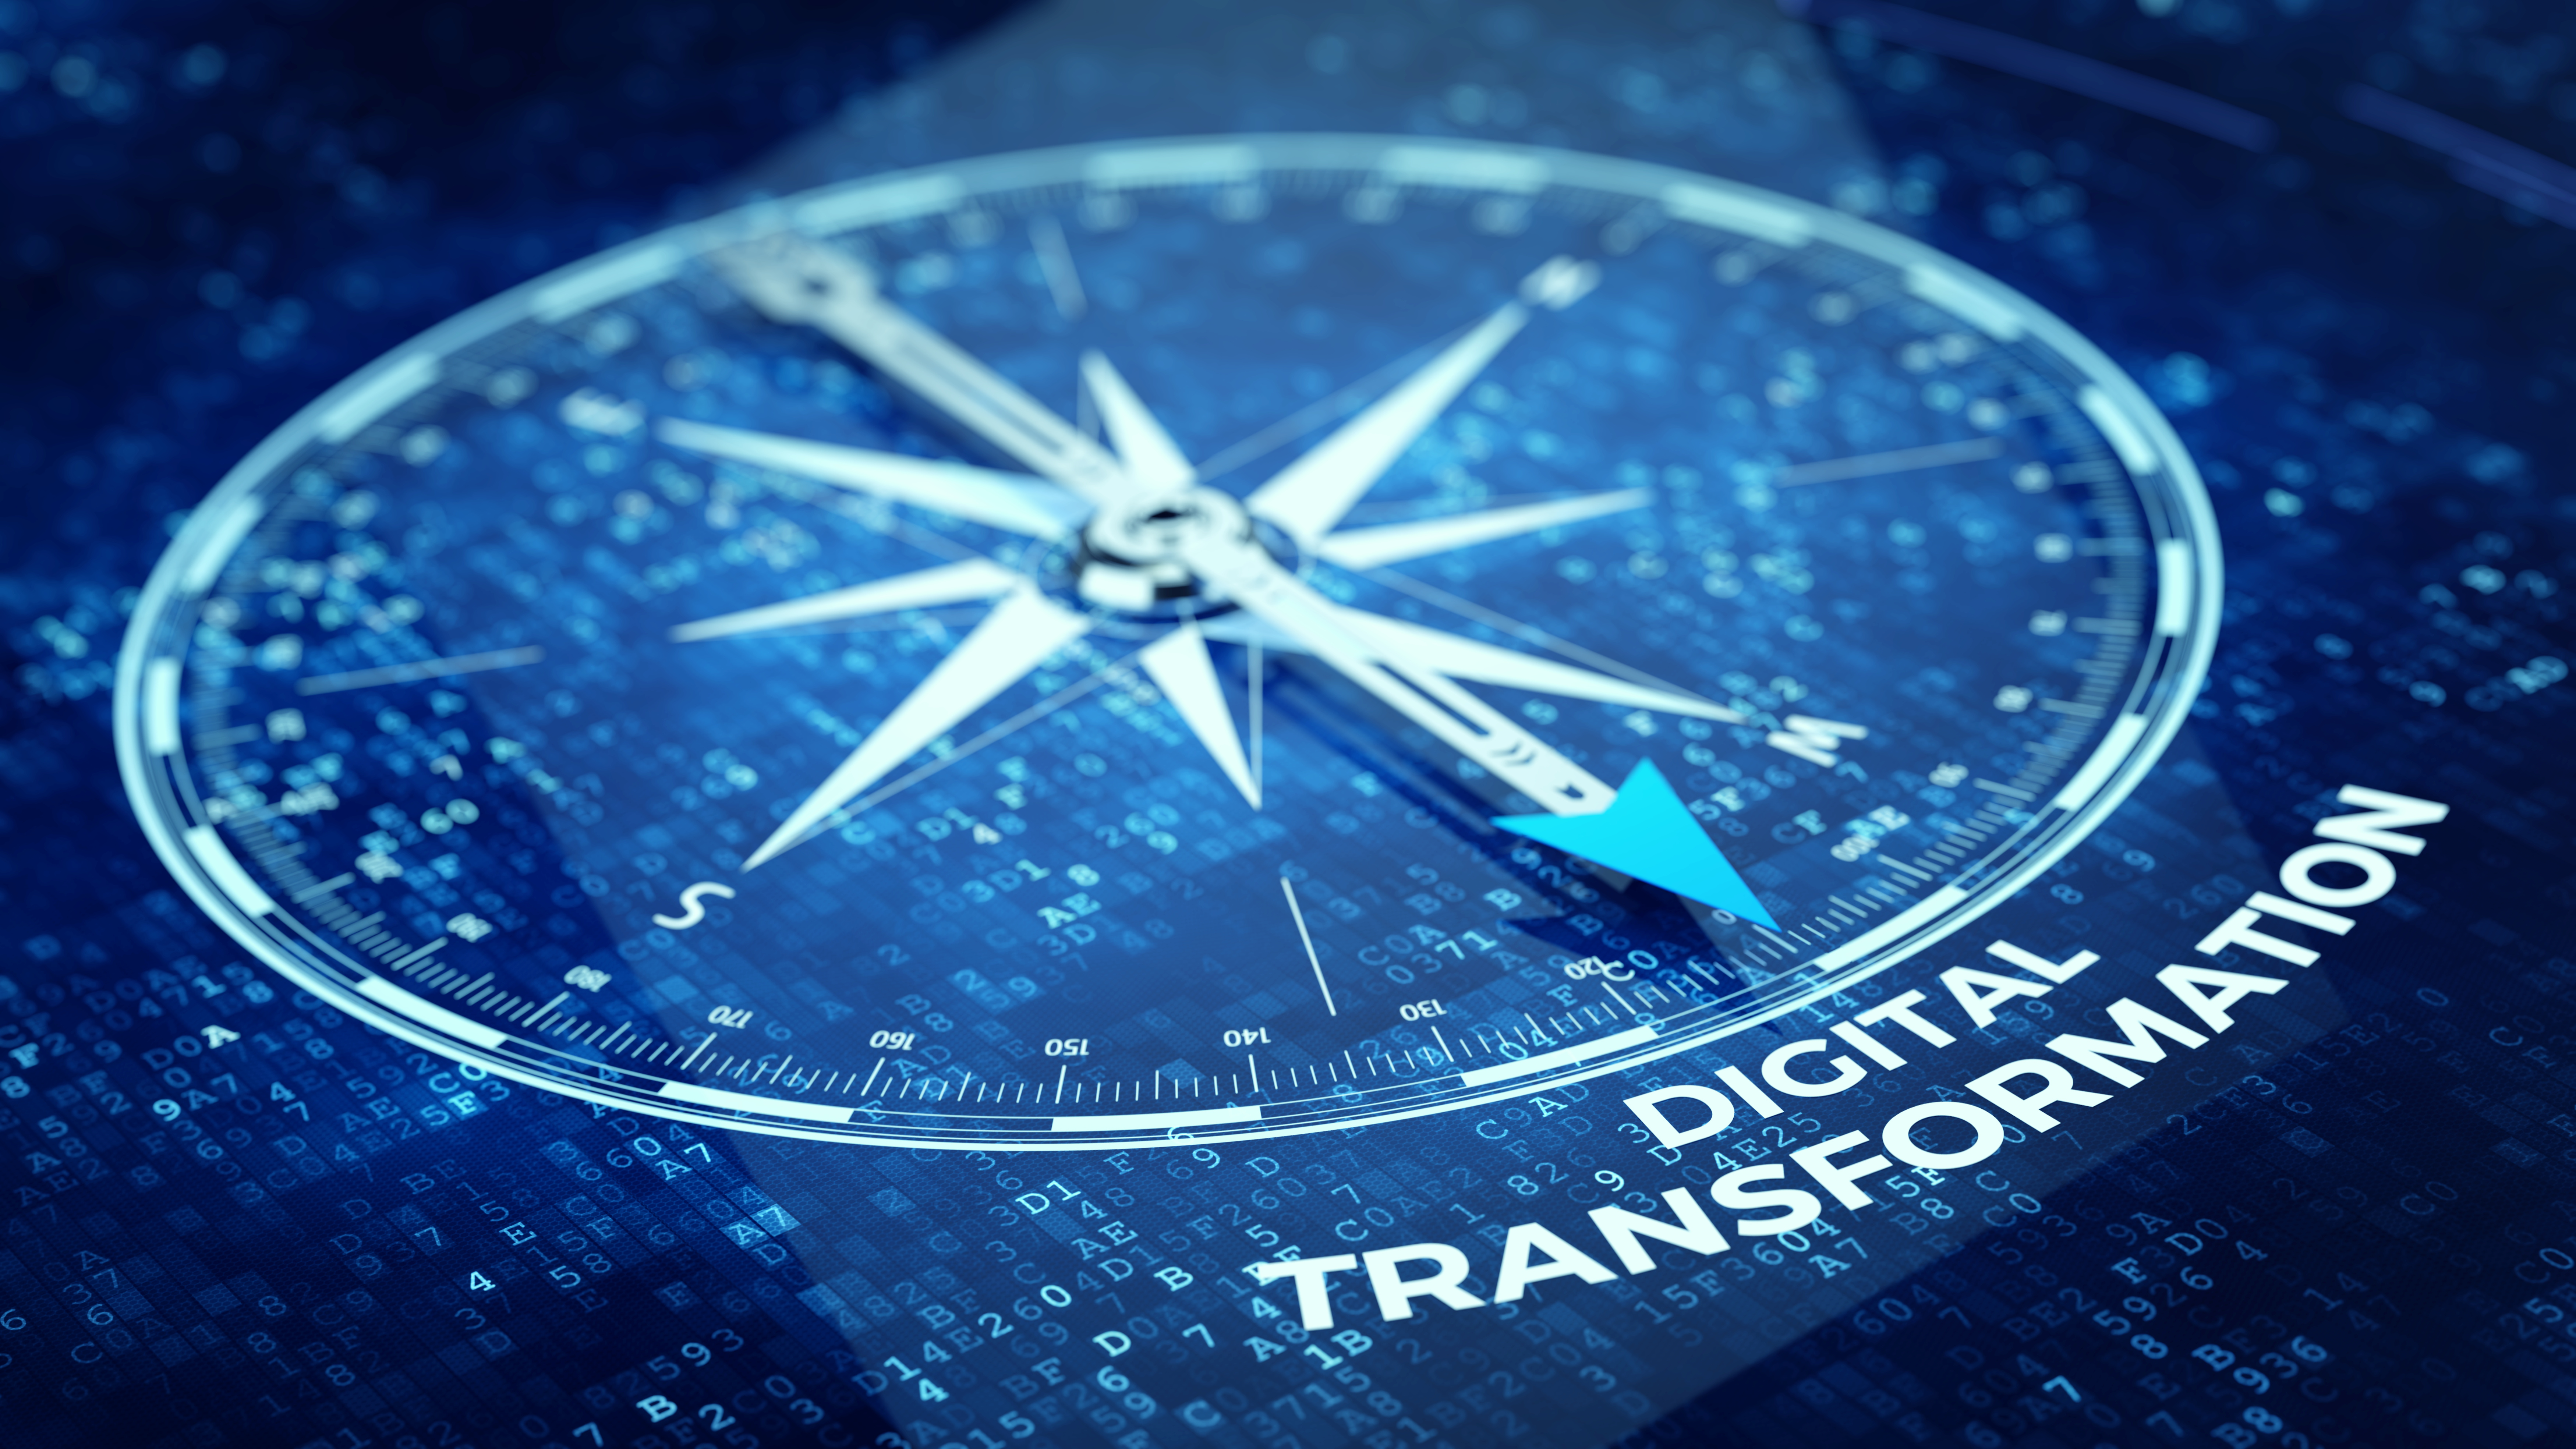 Red Hat expert: Digital transformation is not going away any time soon